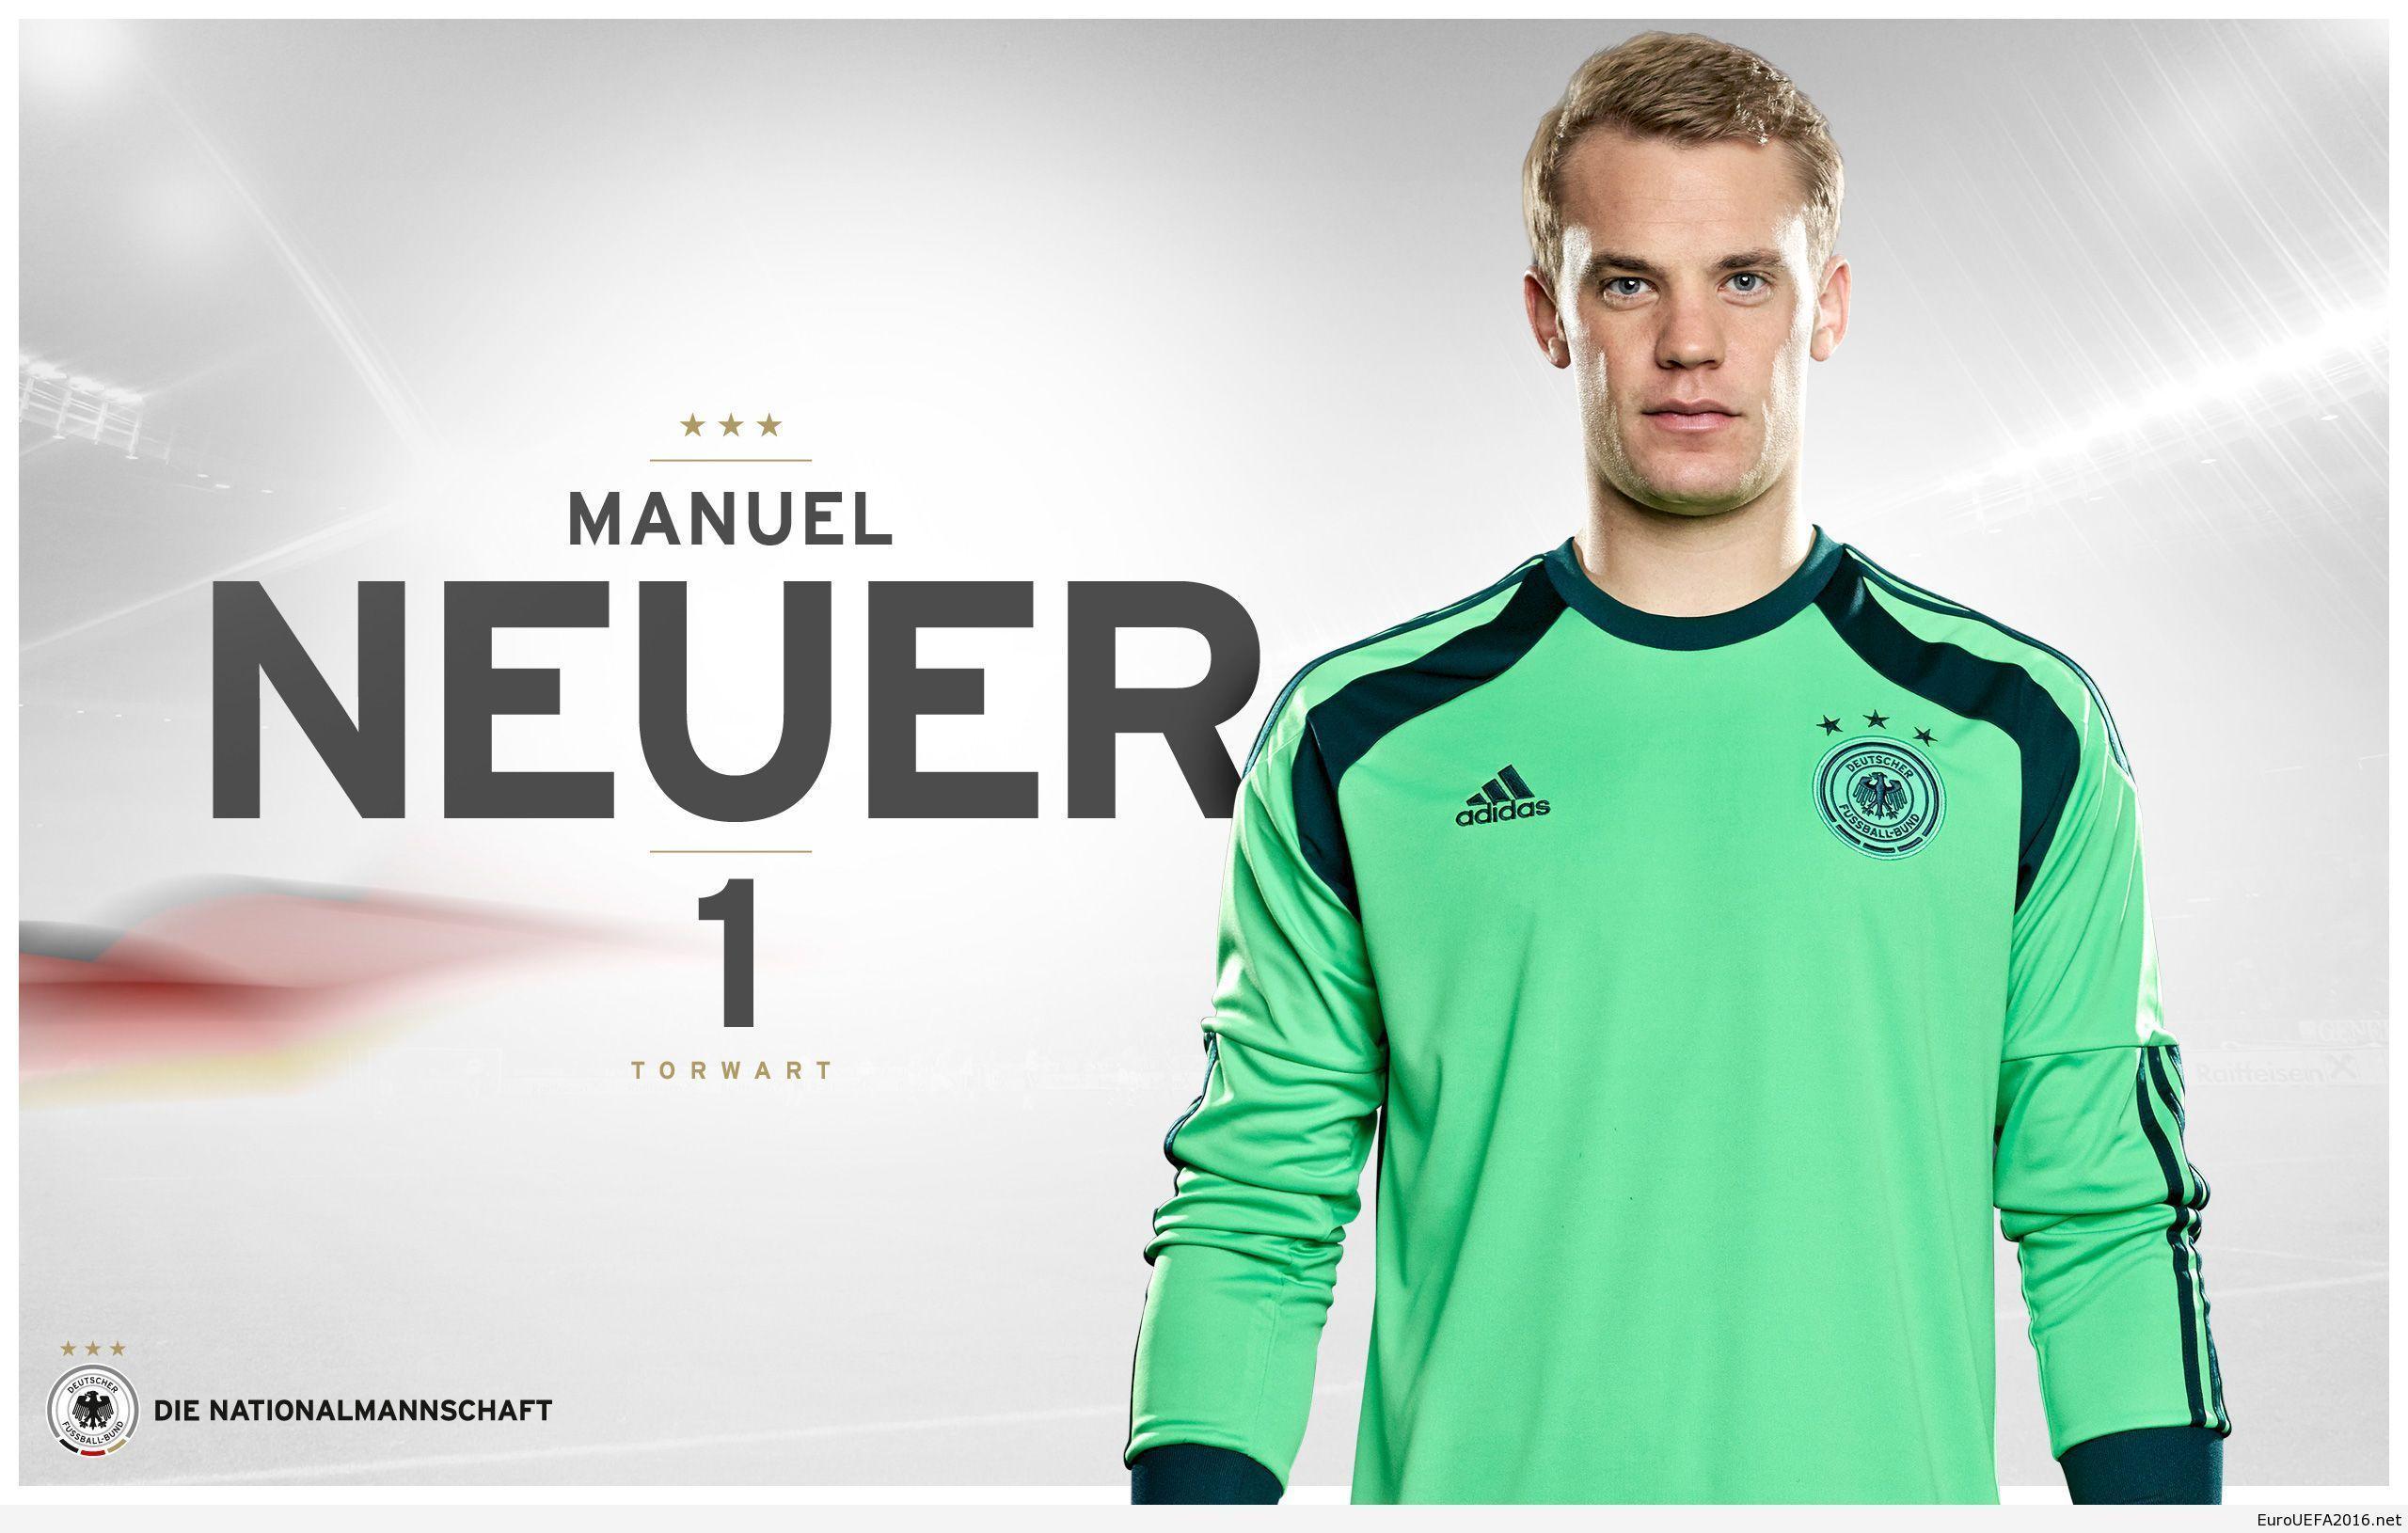 Euro 2016 Manuel Neuer Germany team wallpaper, picture